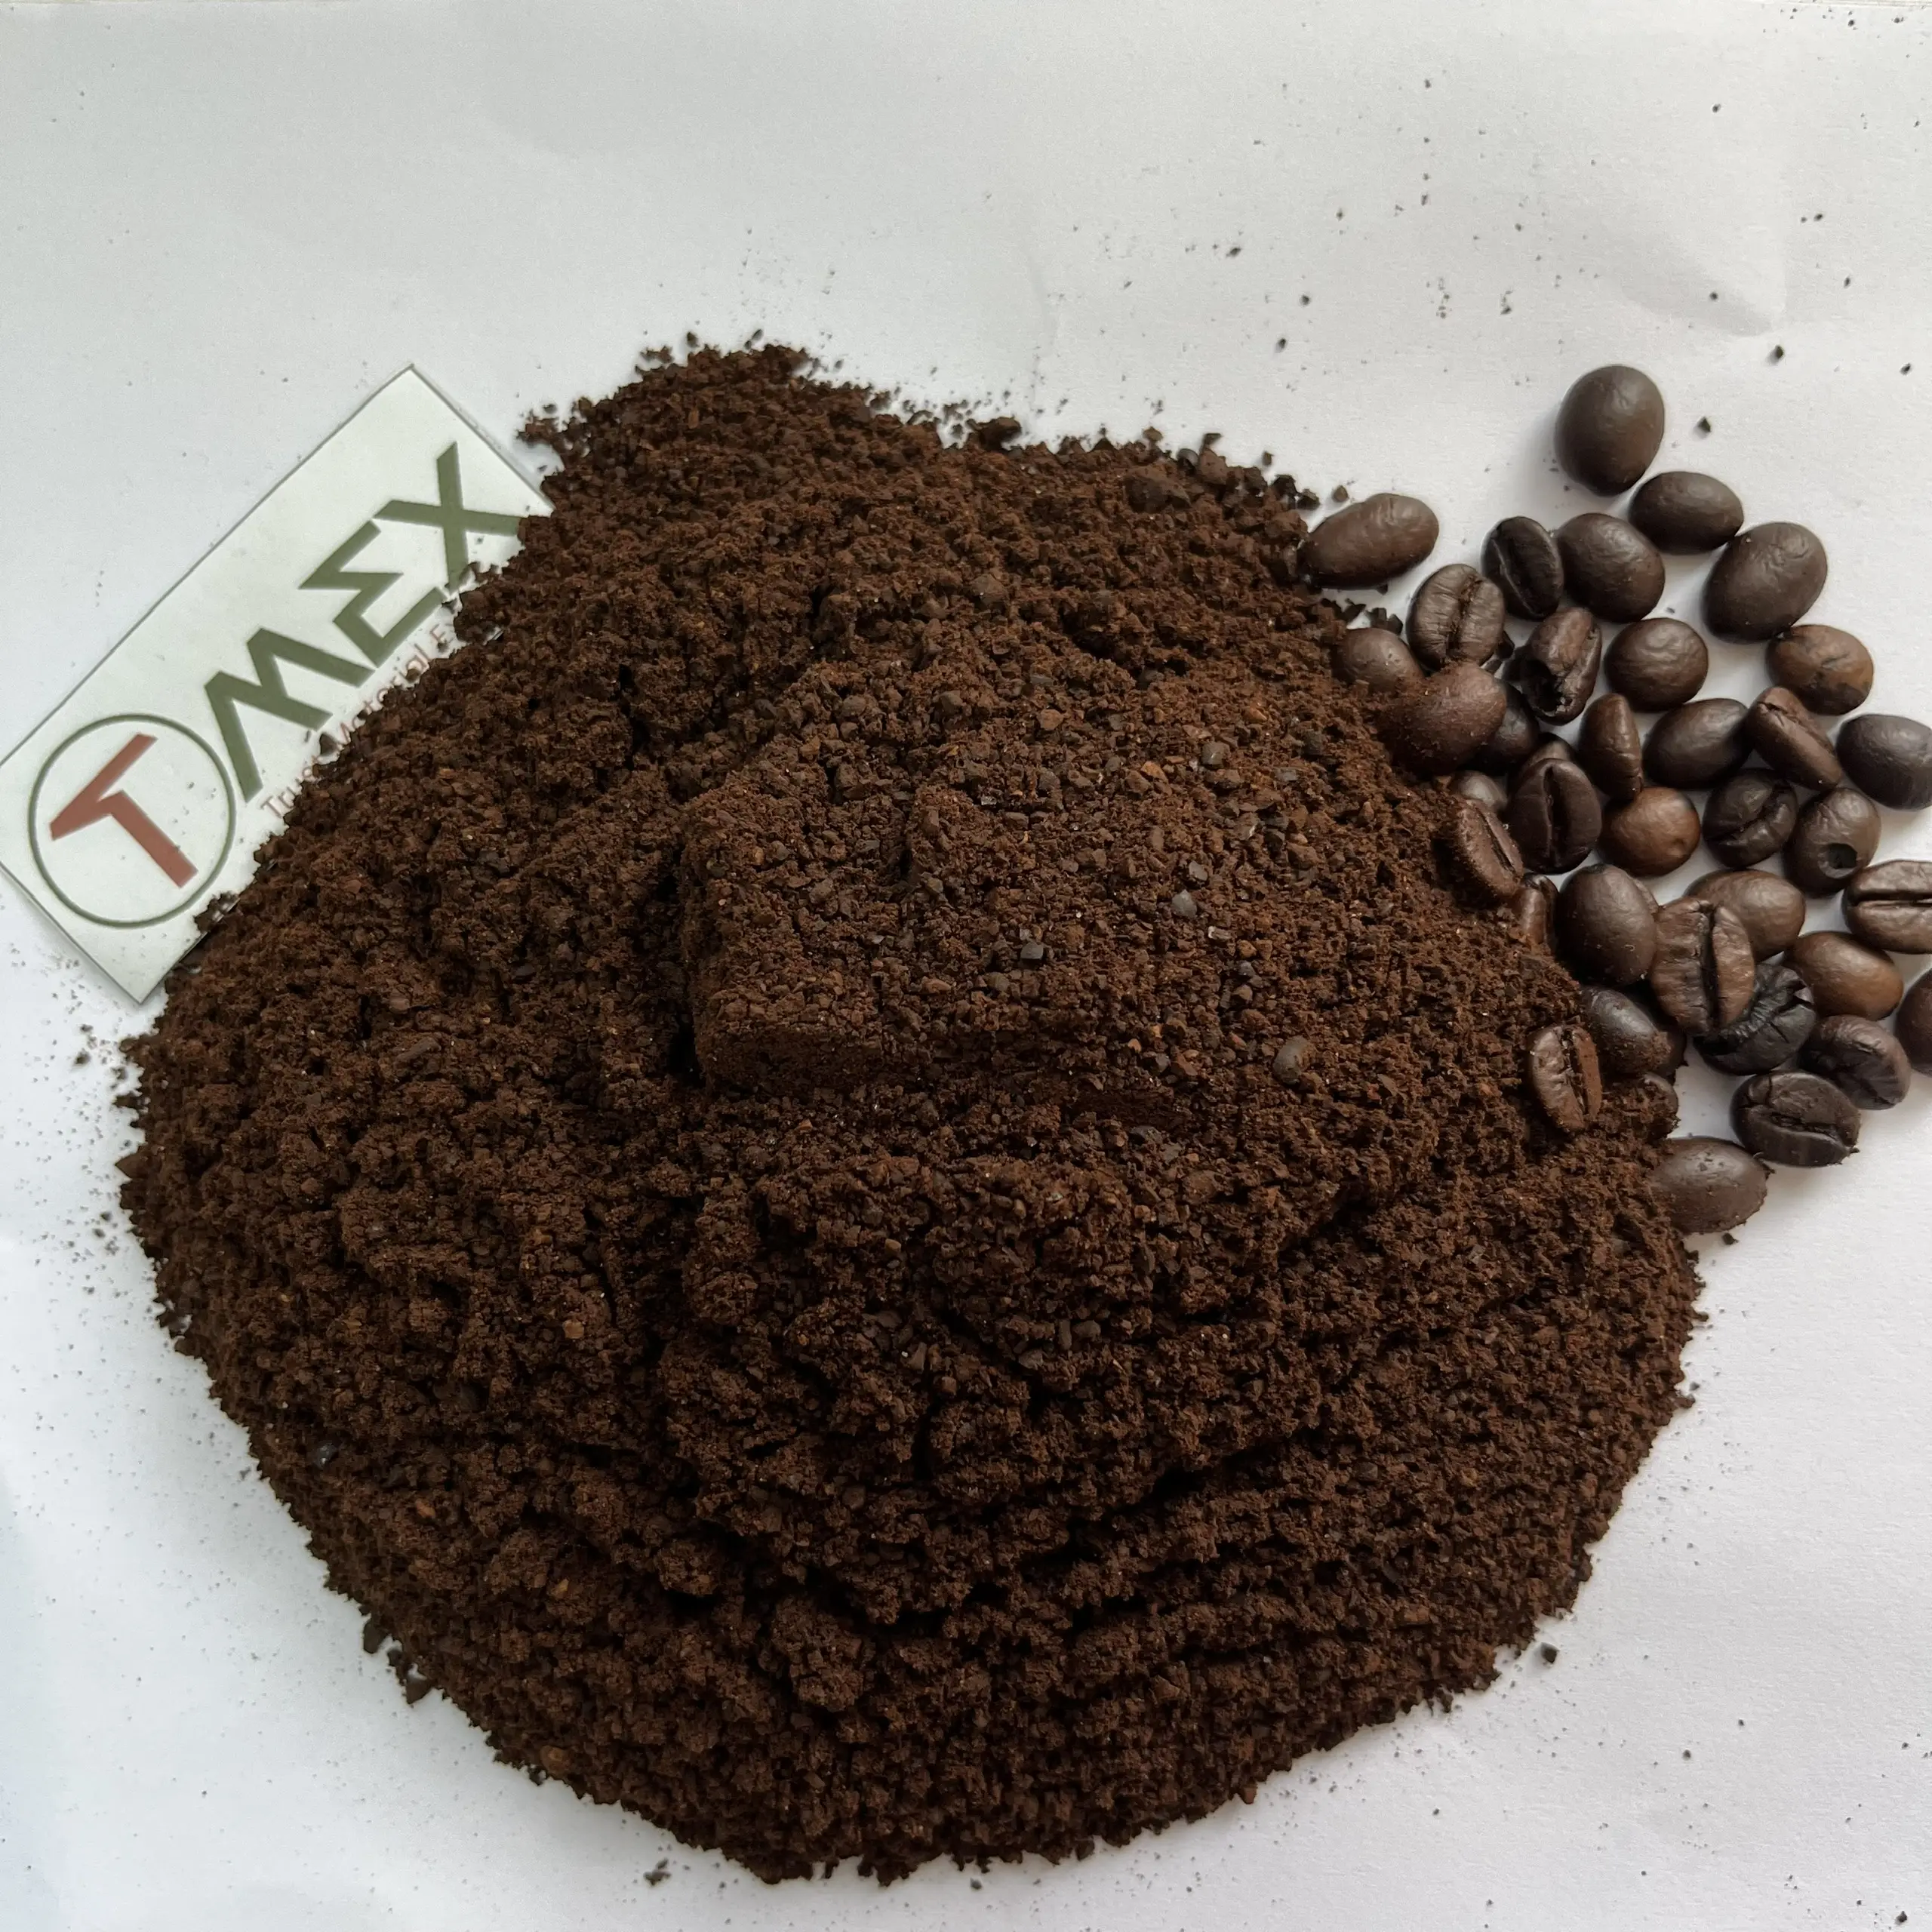 Roasted Black Coffee with High quality From Vietnam